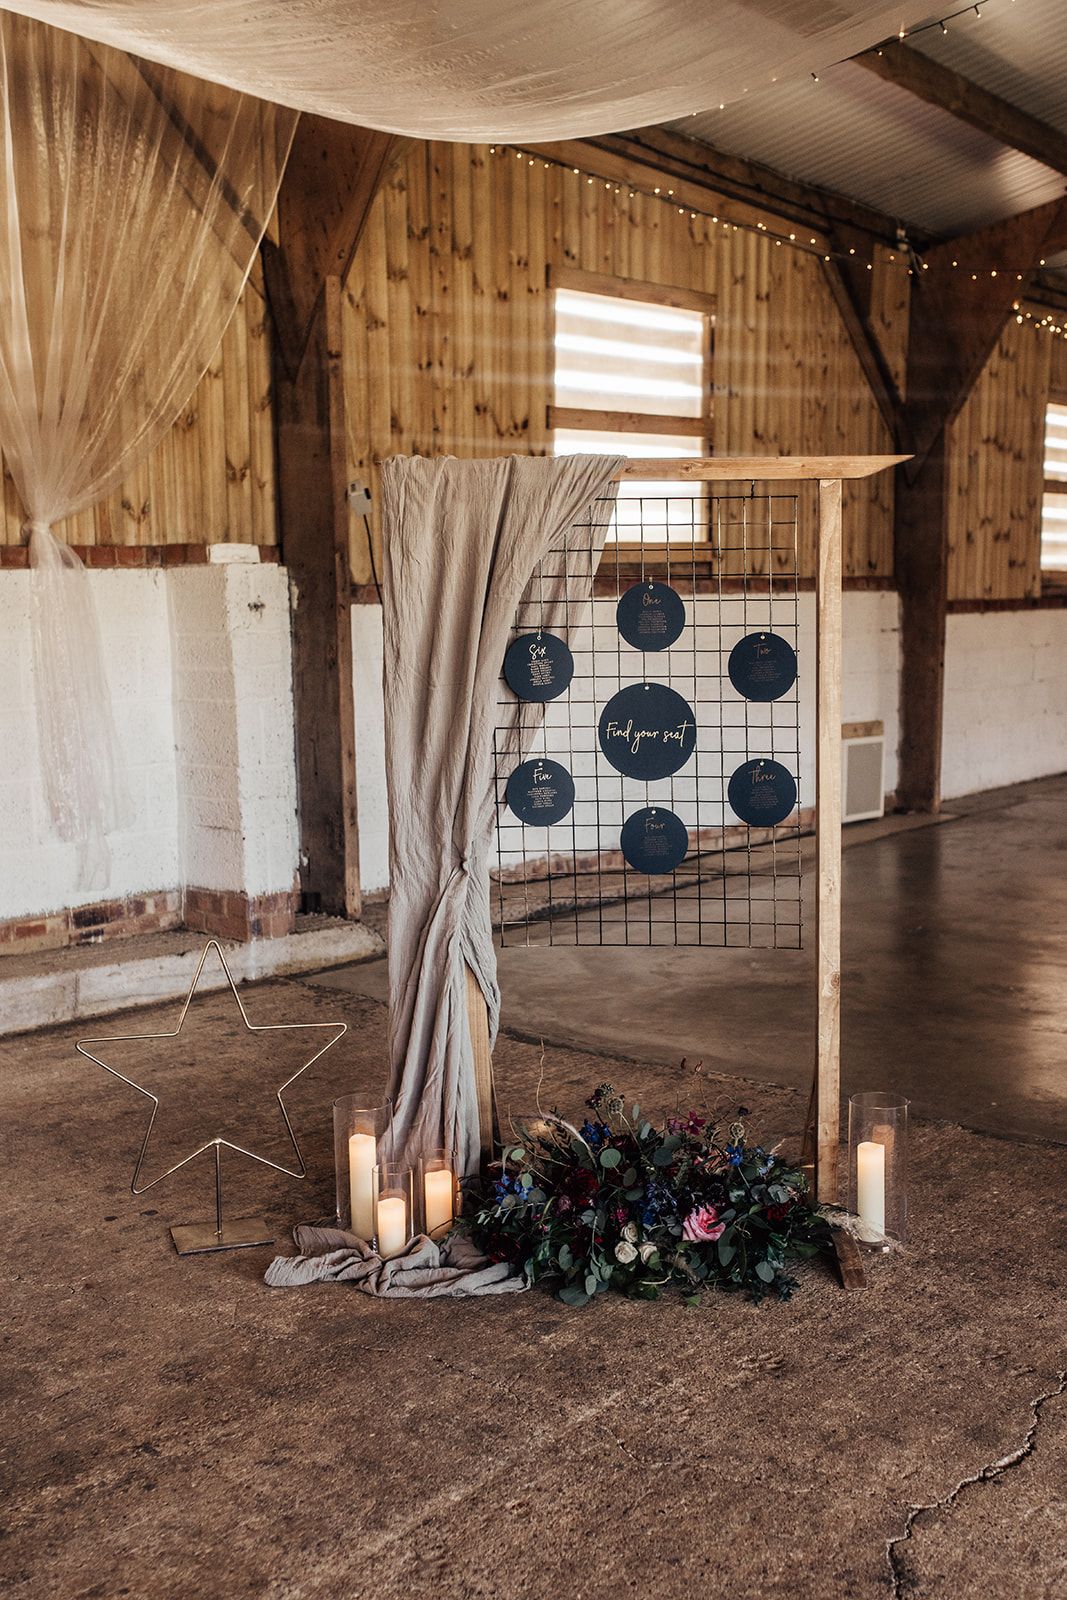 Beautiful table plan with charcoal circles representing the tables attached to a grid. A star, candles and floral arrangement sit underneath the frame and some fabric hangs on the left hand side of the frame giving it an elegant, eye catching look. Photo thanks to Francesca Checkley Photography.